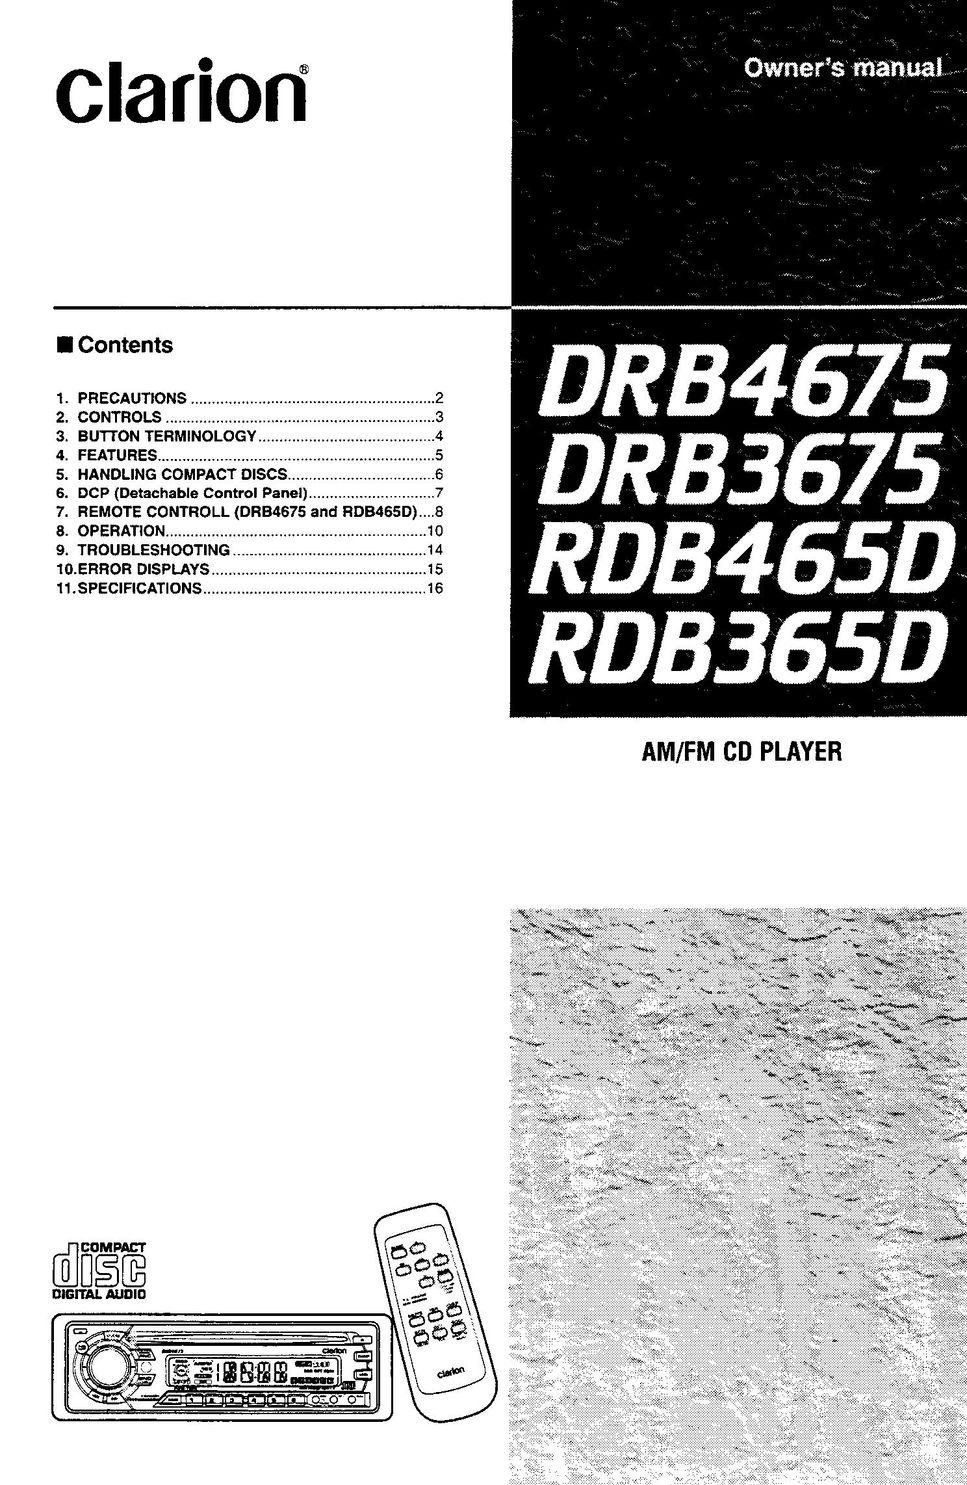 Clarion DRB3657 CD Player User Manual